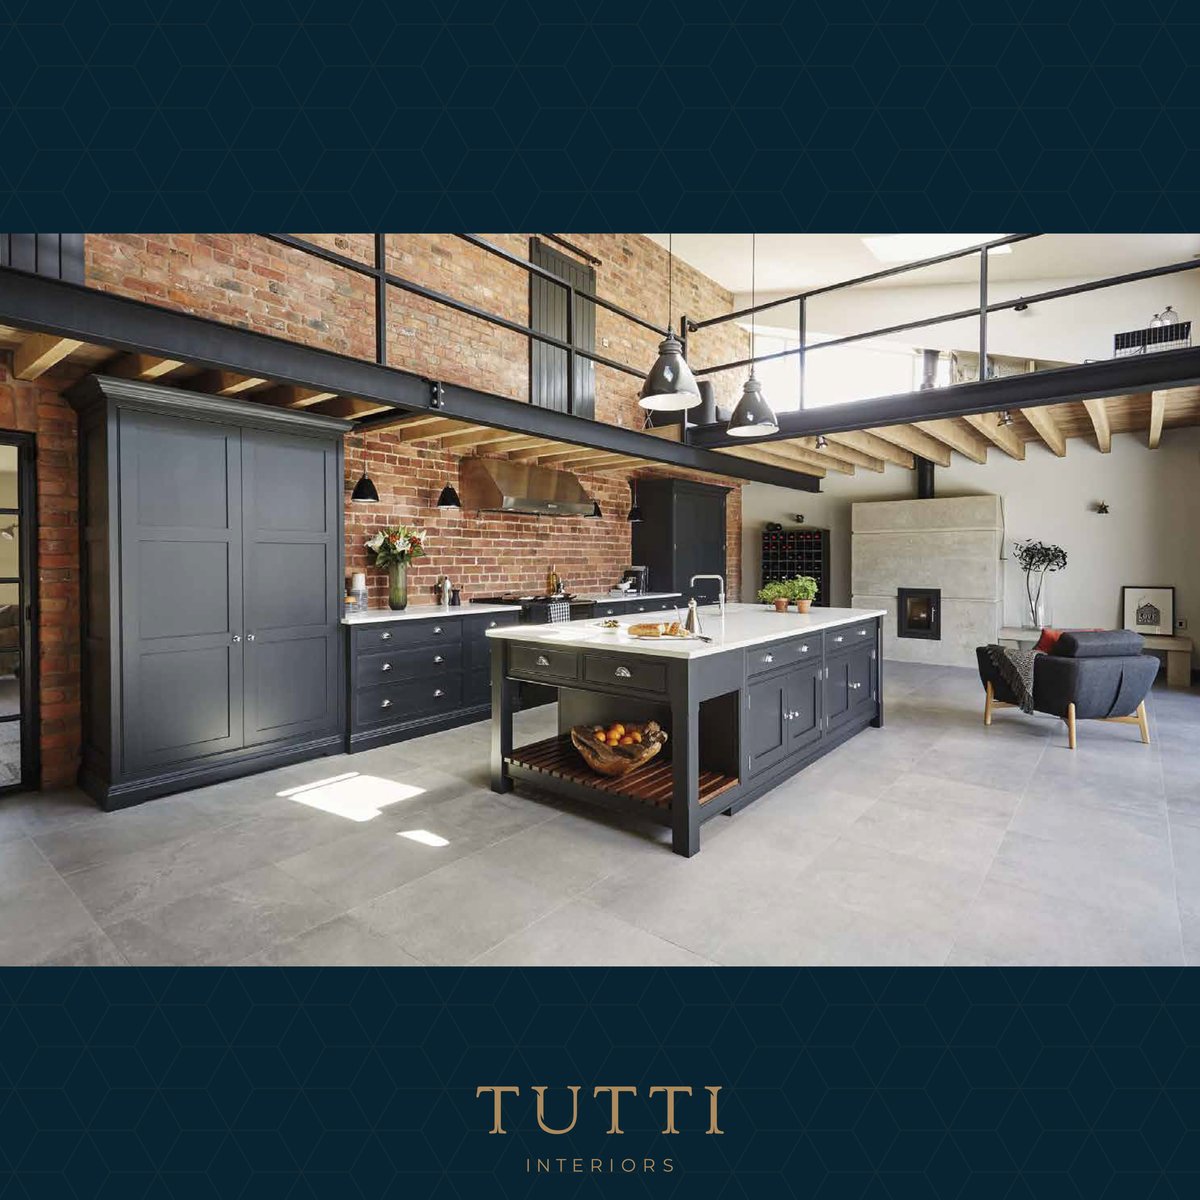 During lockdown, I've been using some of my time looking at future ideas for clients.  There are some amazing products and room themes out there including this by #TomHowleyKitchens. This epic Kitchen, is my kind of Kitchen. tomhowley.co.uk